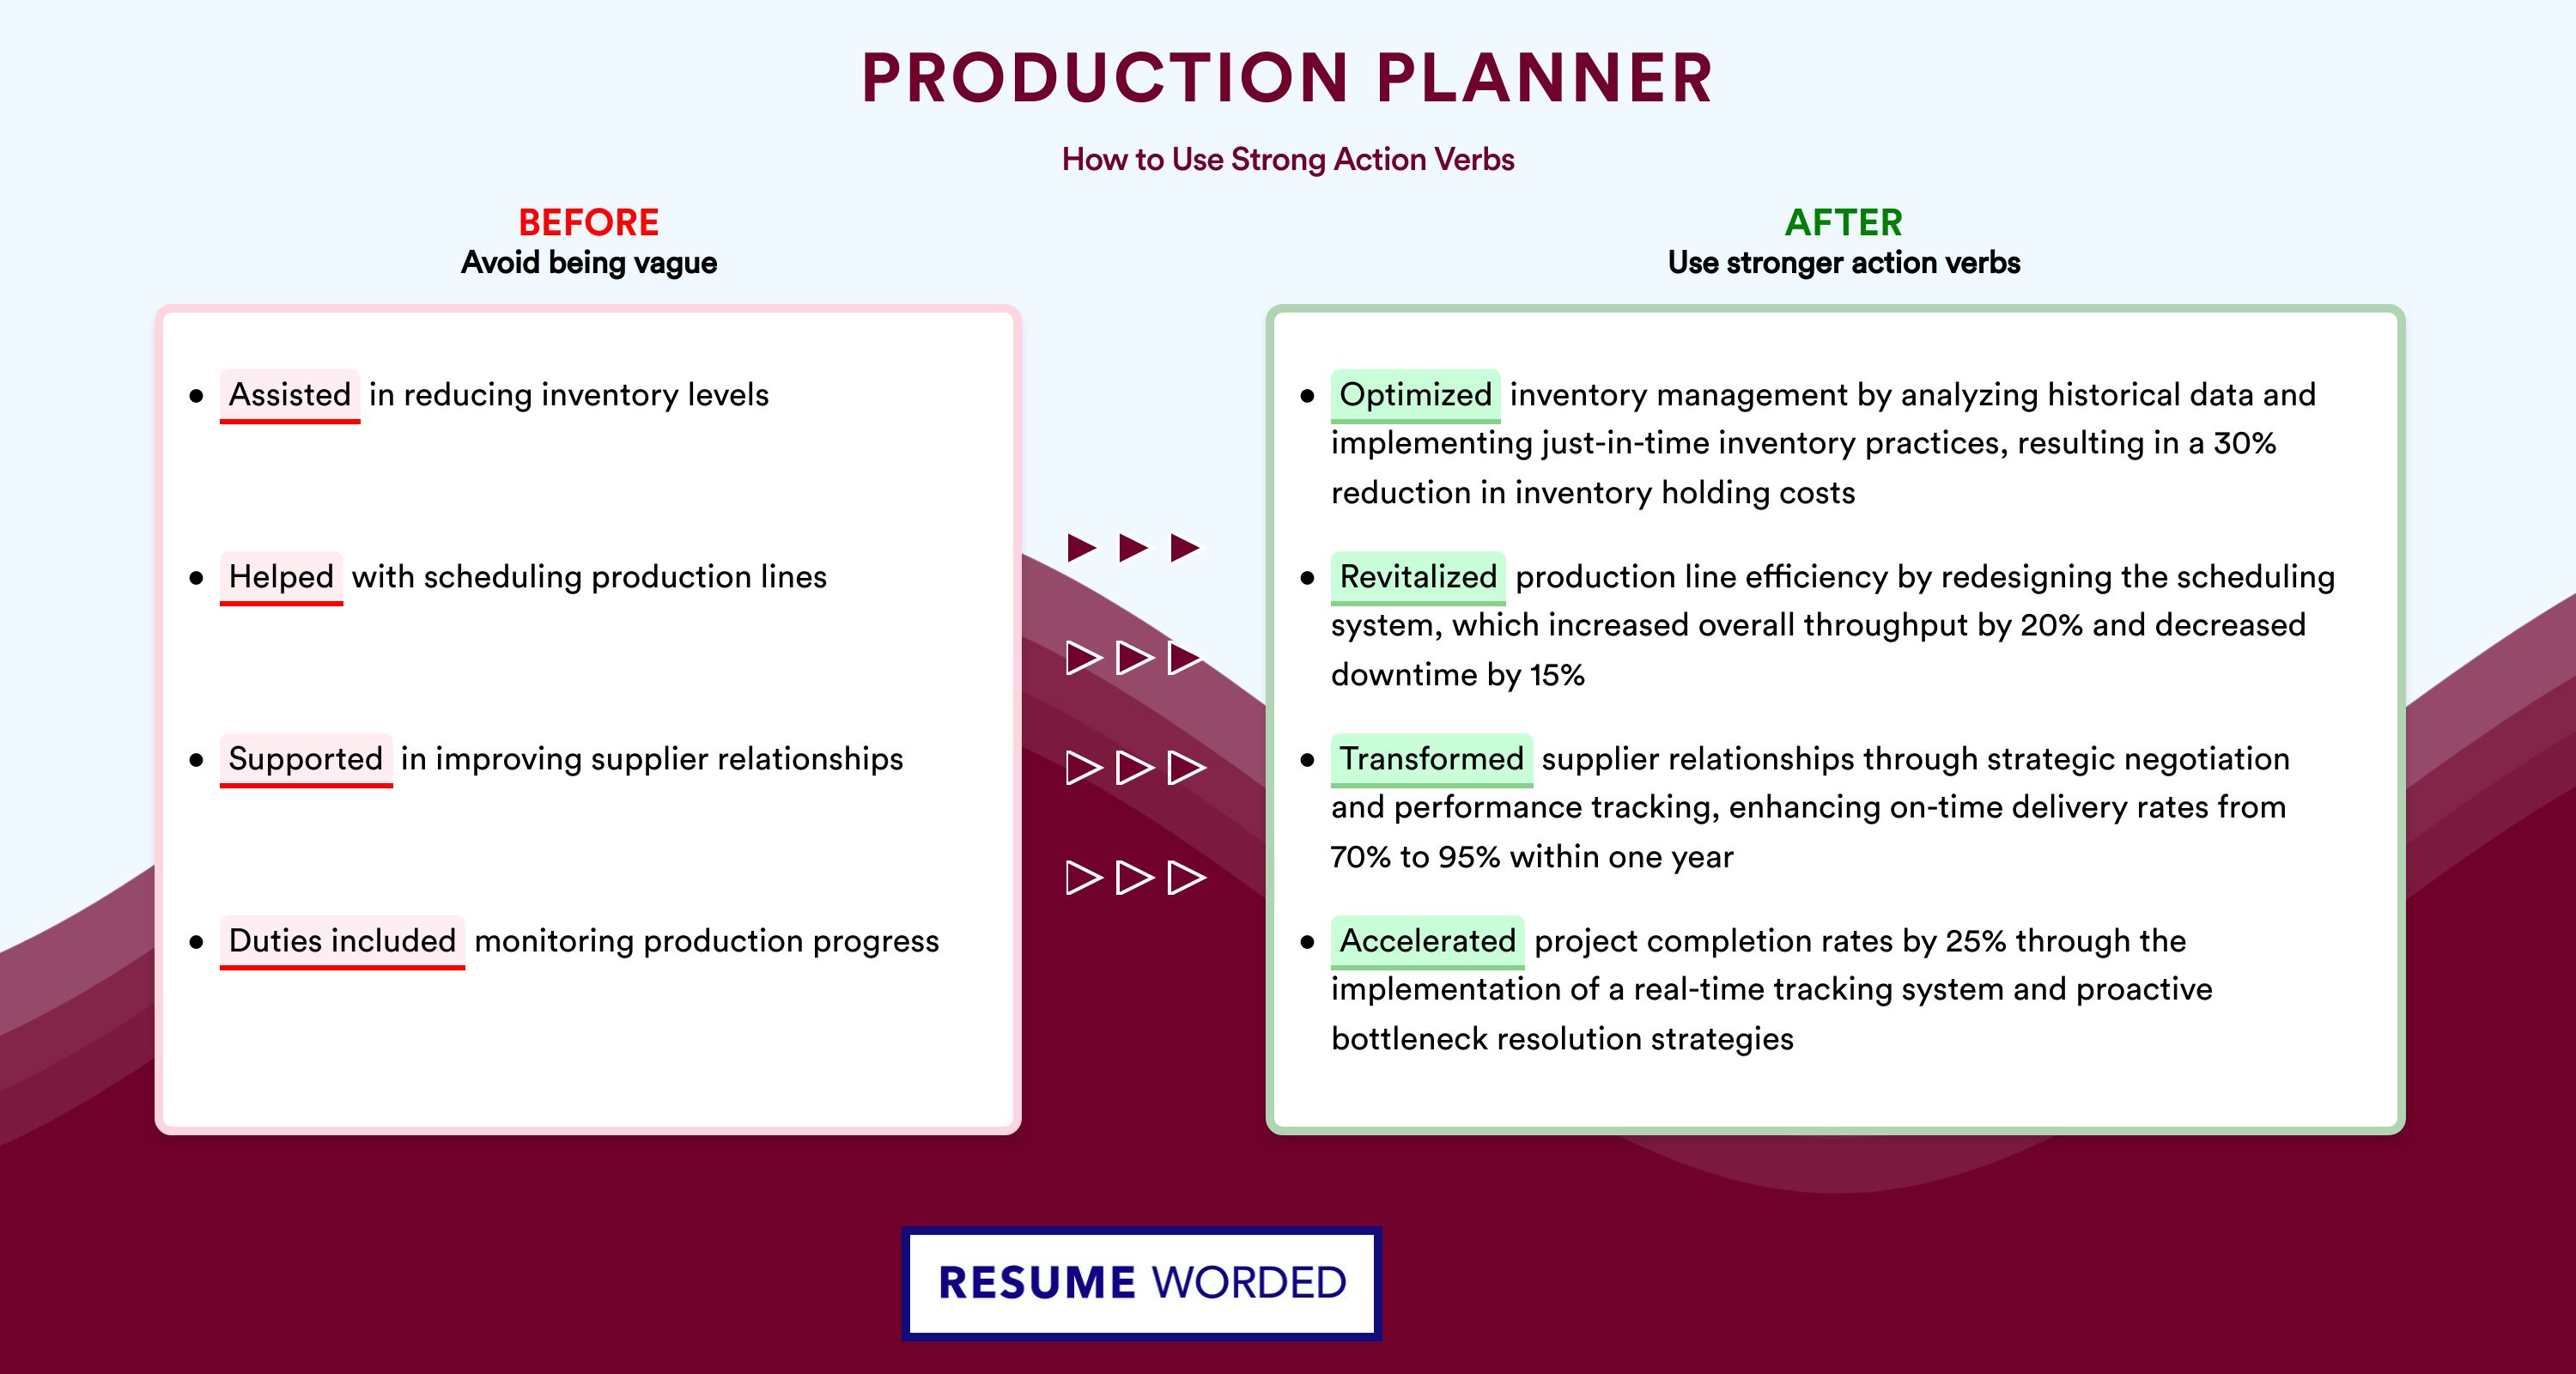 Action Verbs for Production Planner